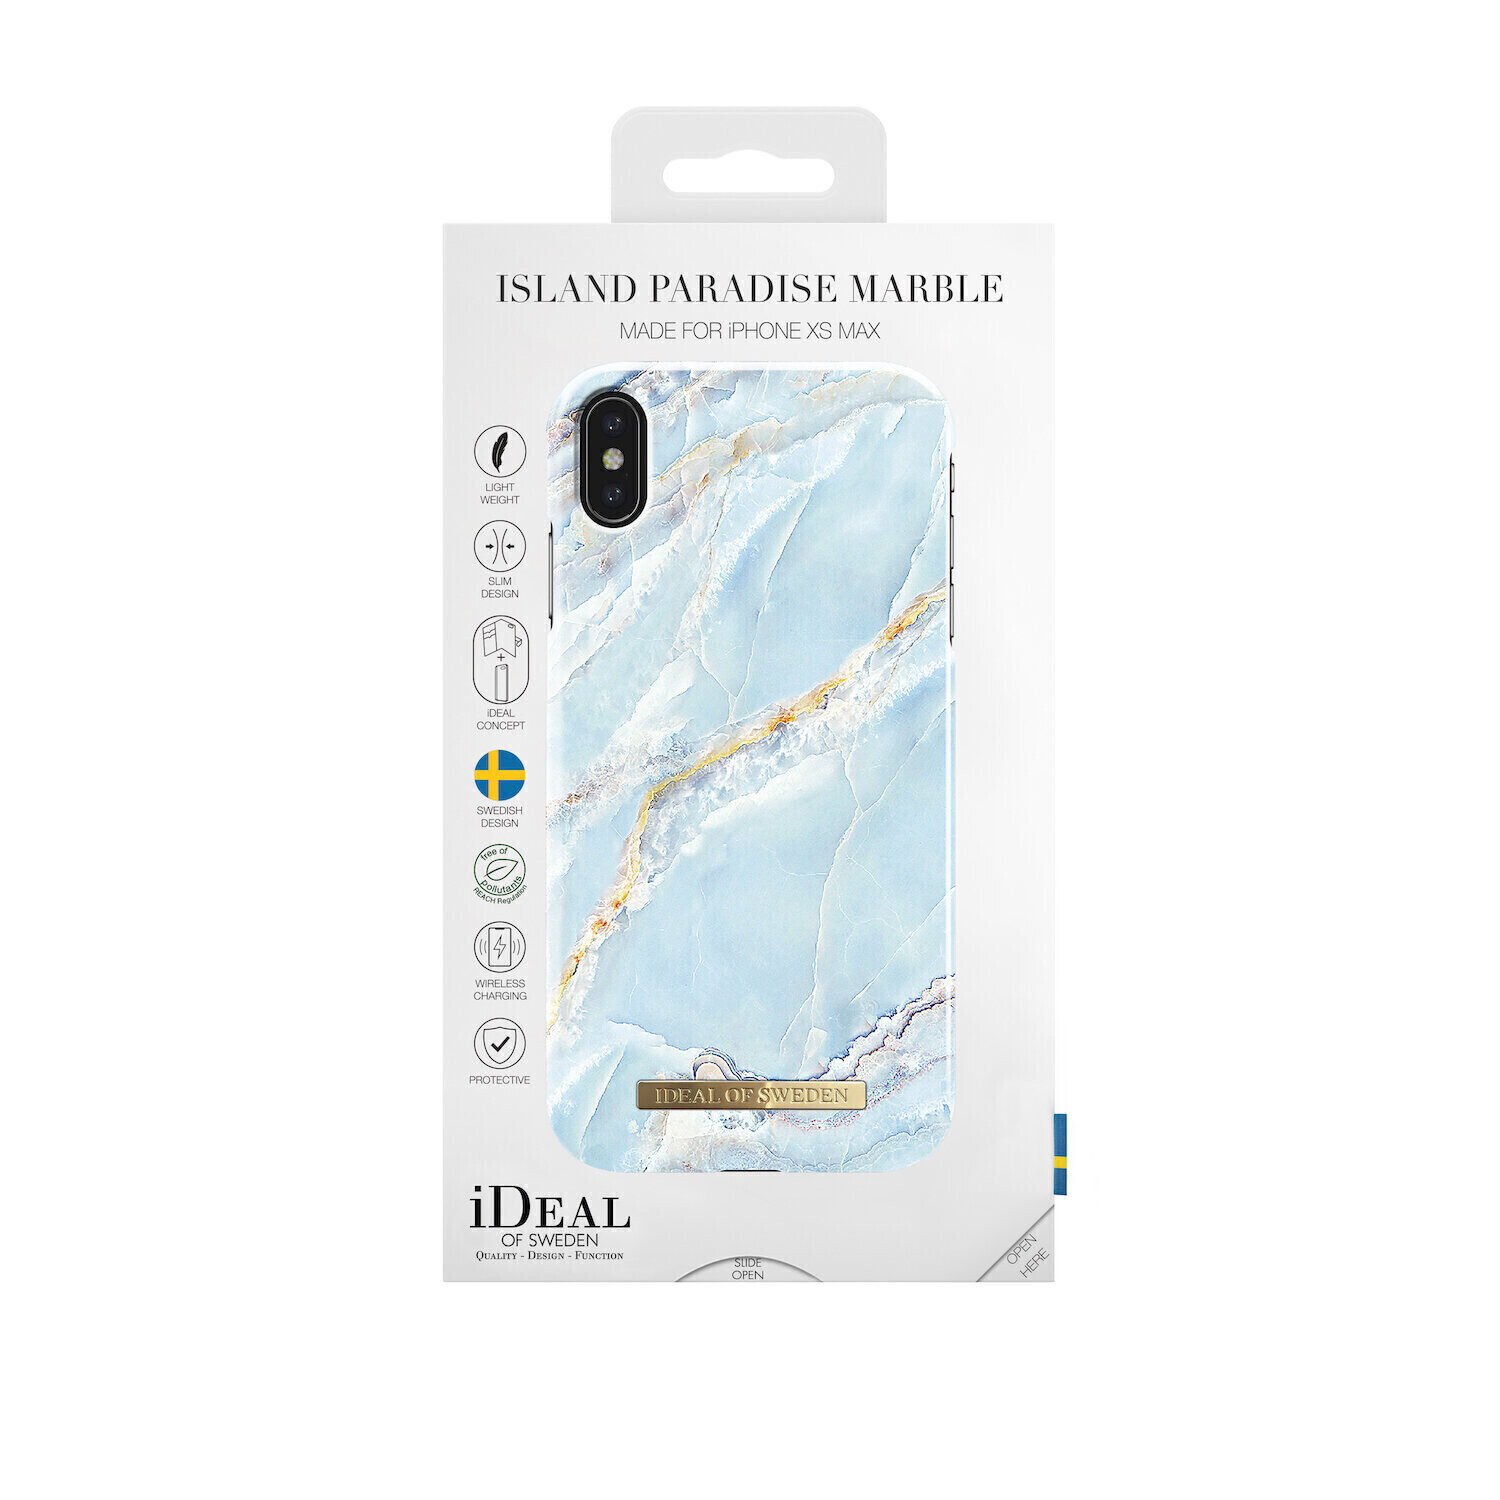 iDeal Of Sweden iPhone Xs Max Fashion Case S/S 2017, Island Paradise Marble